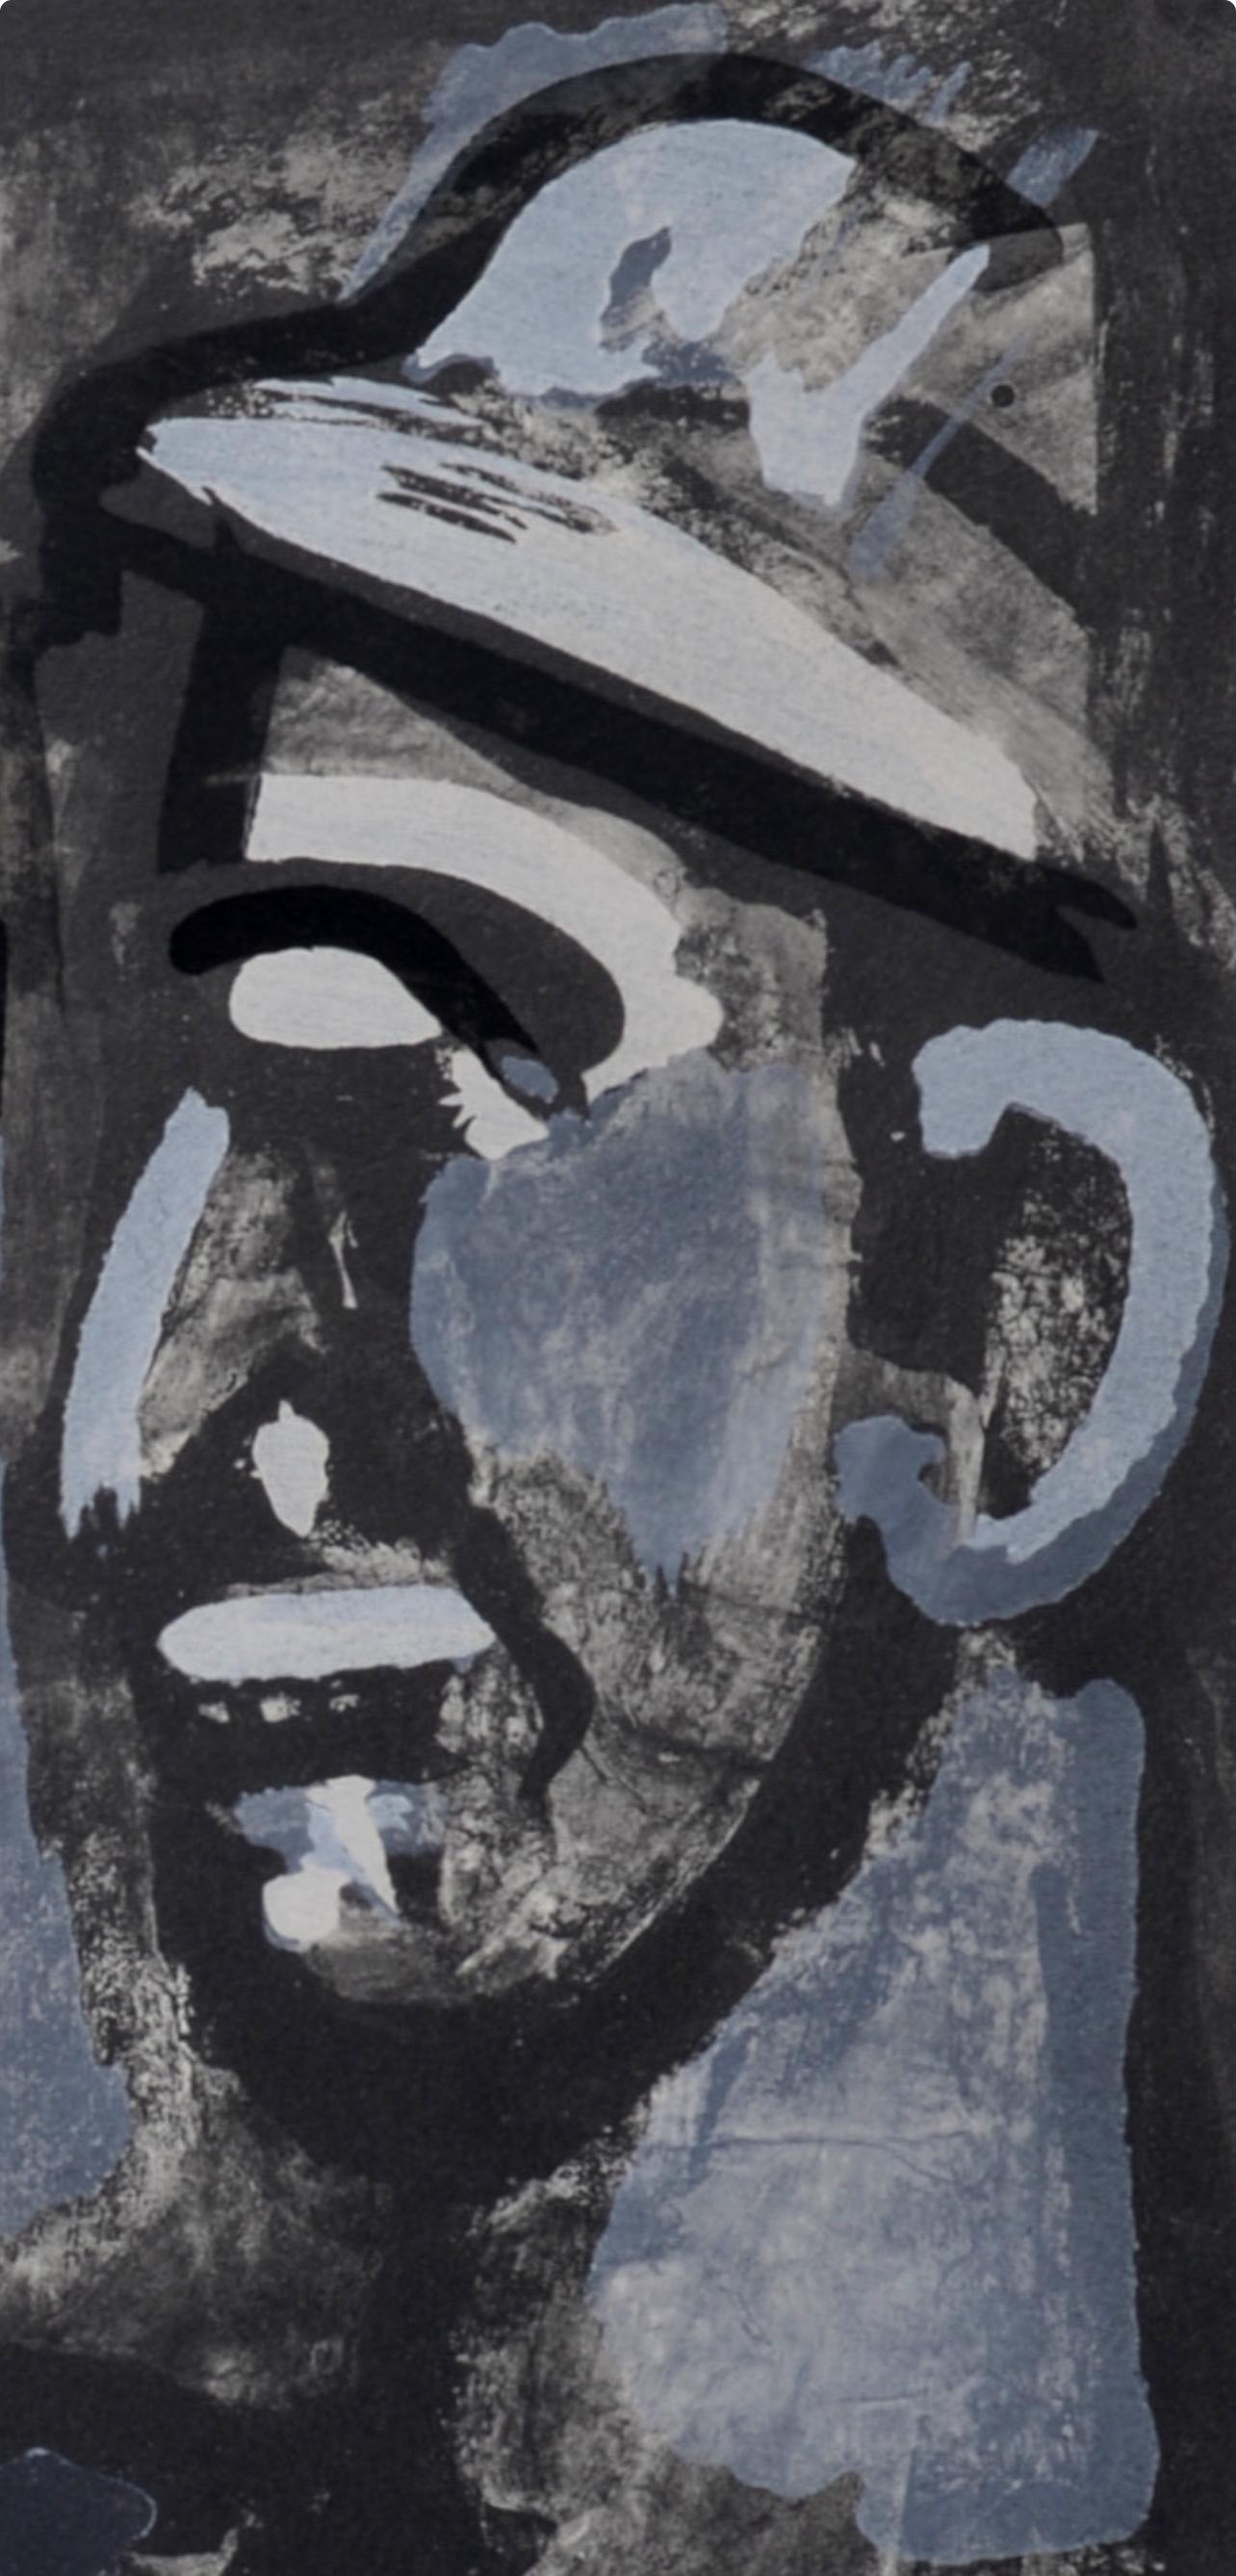 Rouault, Face à Face, Dix Reproductions (after) - Modern Print by Georges Rouault